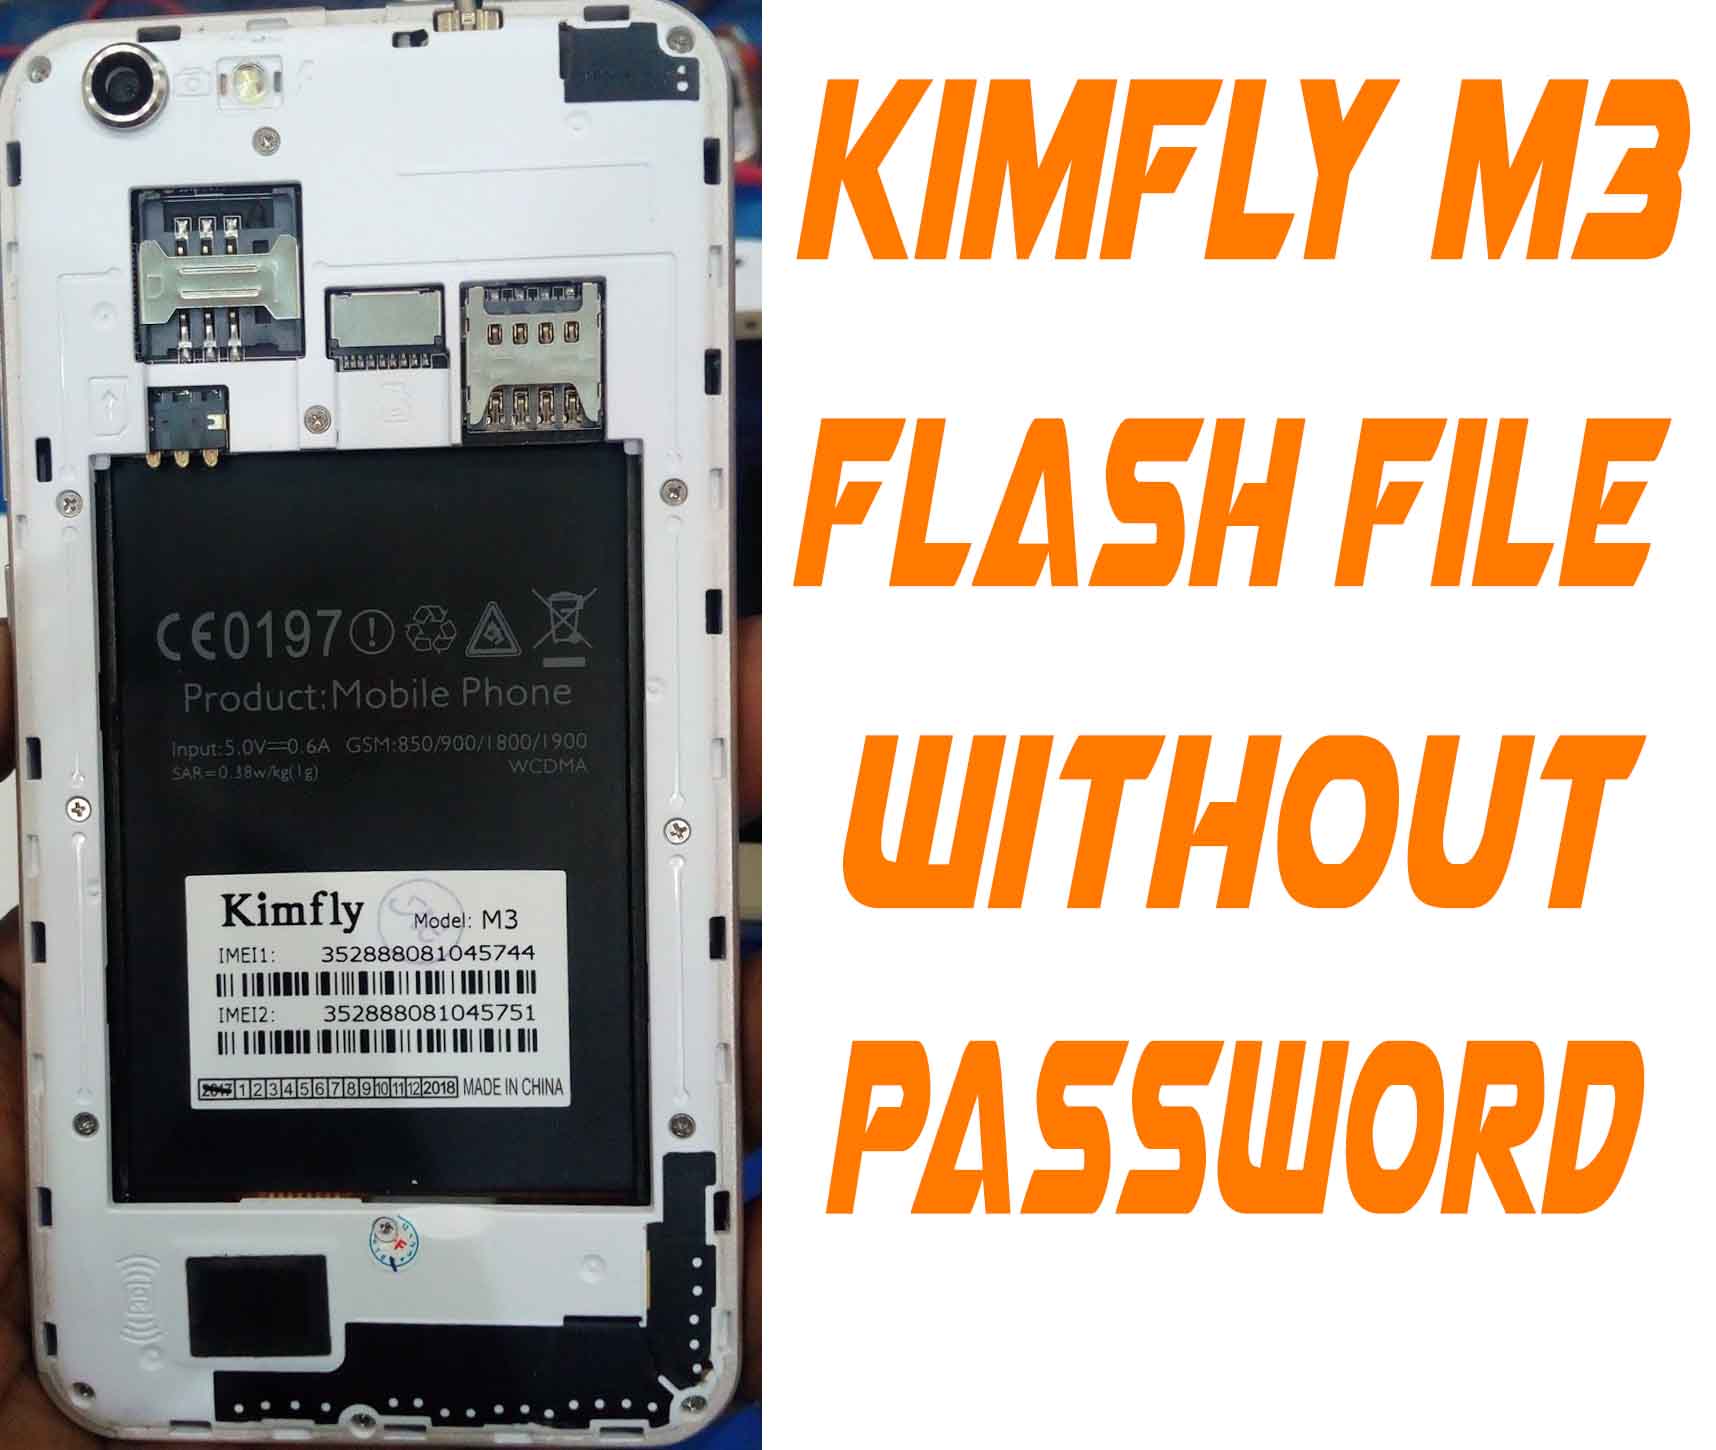 Kimfly M3 flash File Without Password